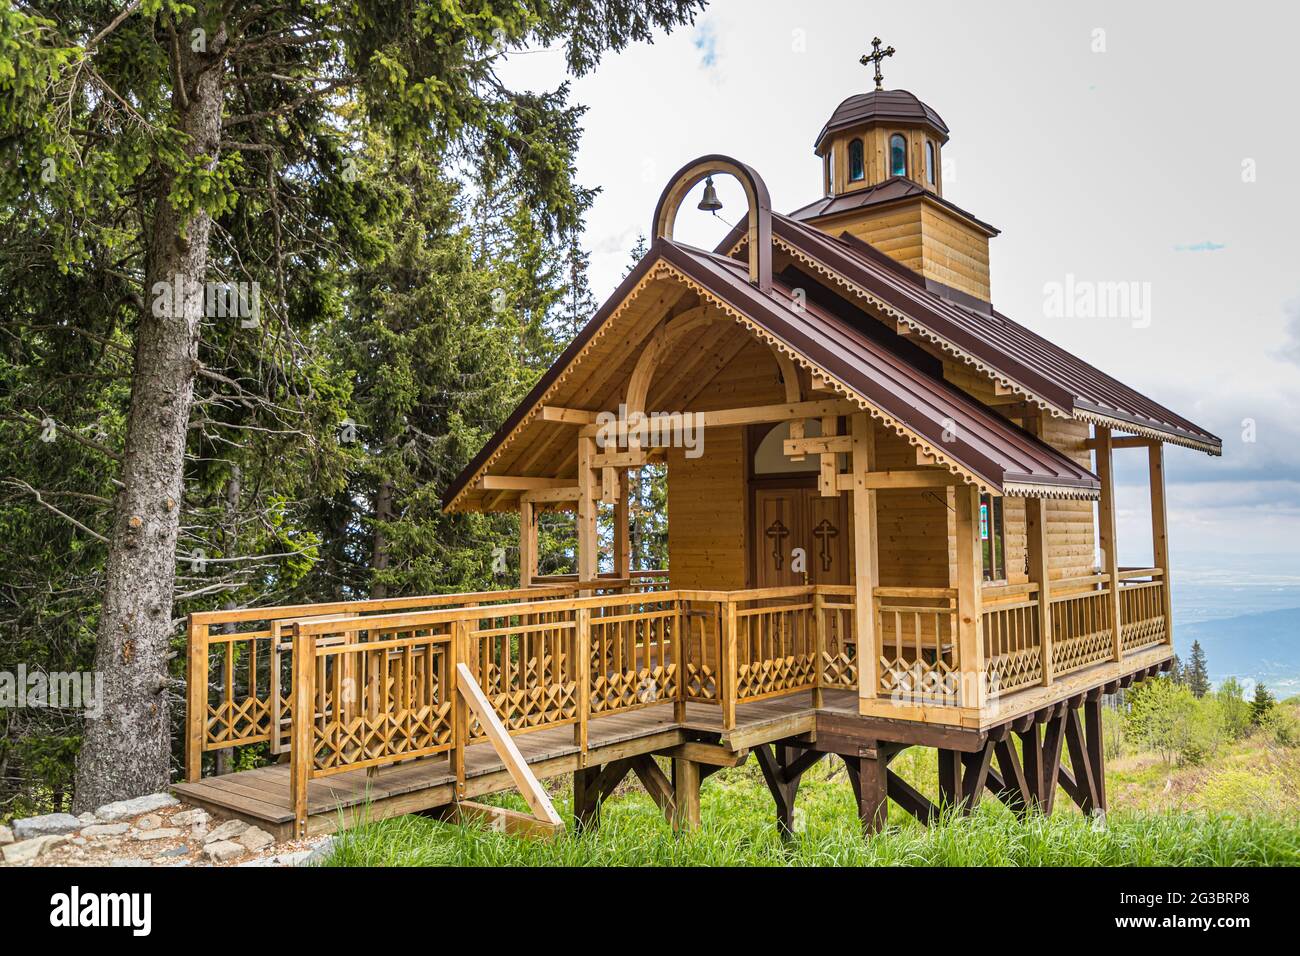 The wooden chapel was built in the nature reserve above Sofia, which was forbidden, but with the subsequent permission of the Orthodox Church. Sofia, Bulgaria Stock Photo